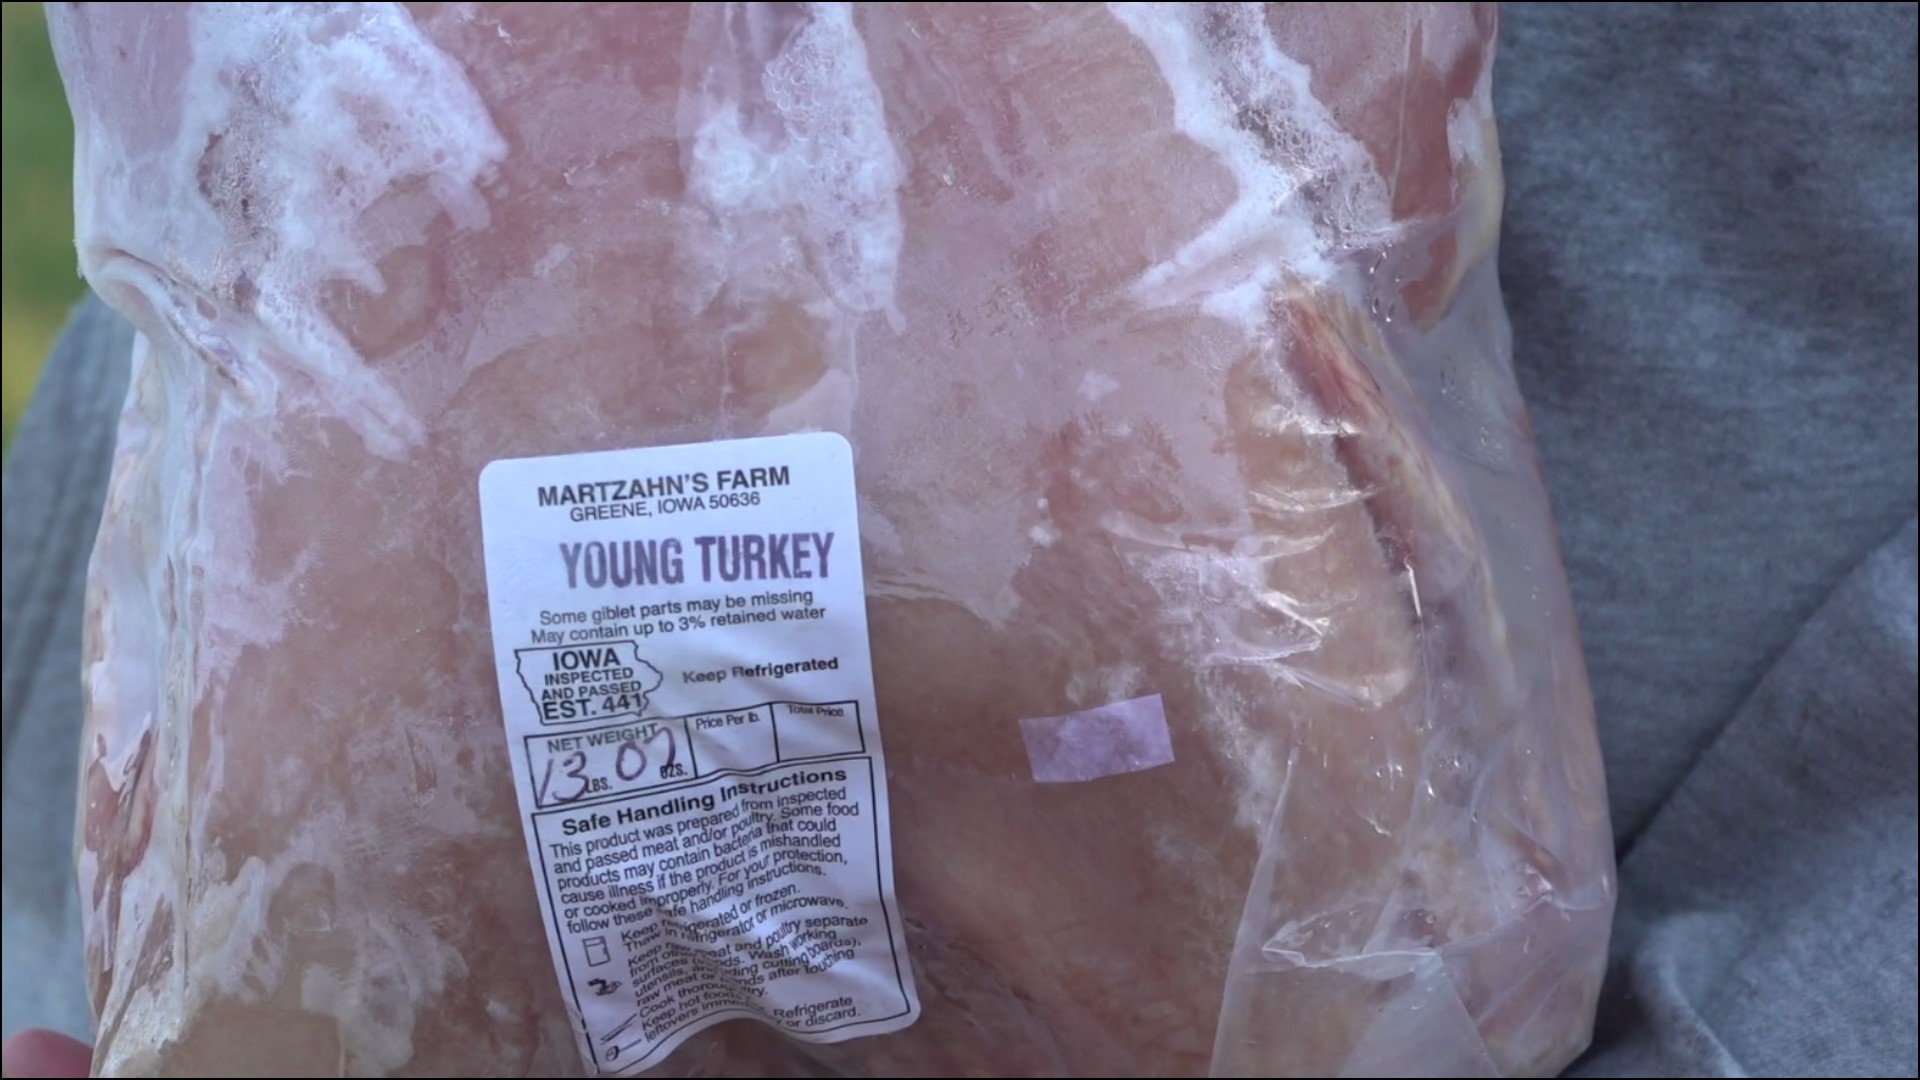 Iowa farmers are encouraging people to buy locally this Thanksgiving, since farmers make only 66 cents off a $21.89 retail turkey.